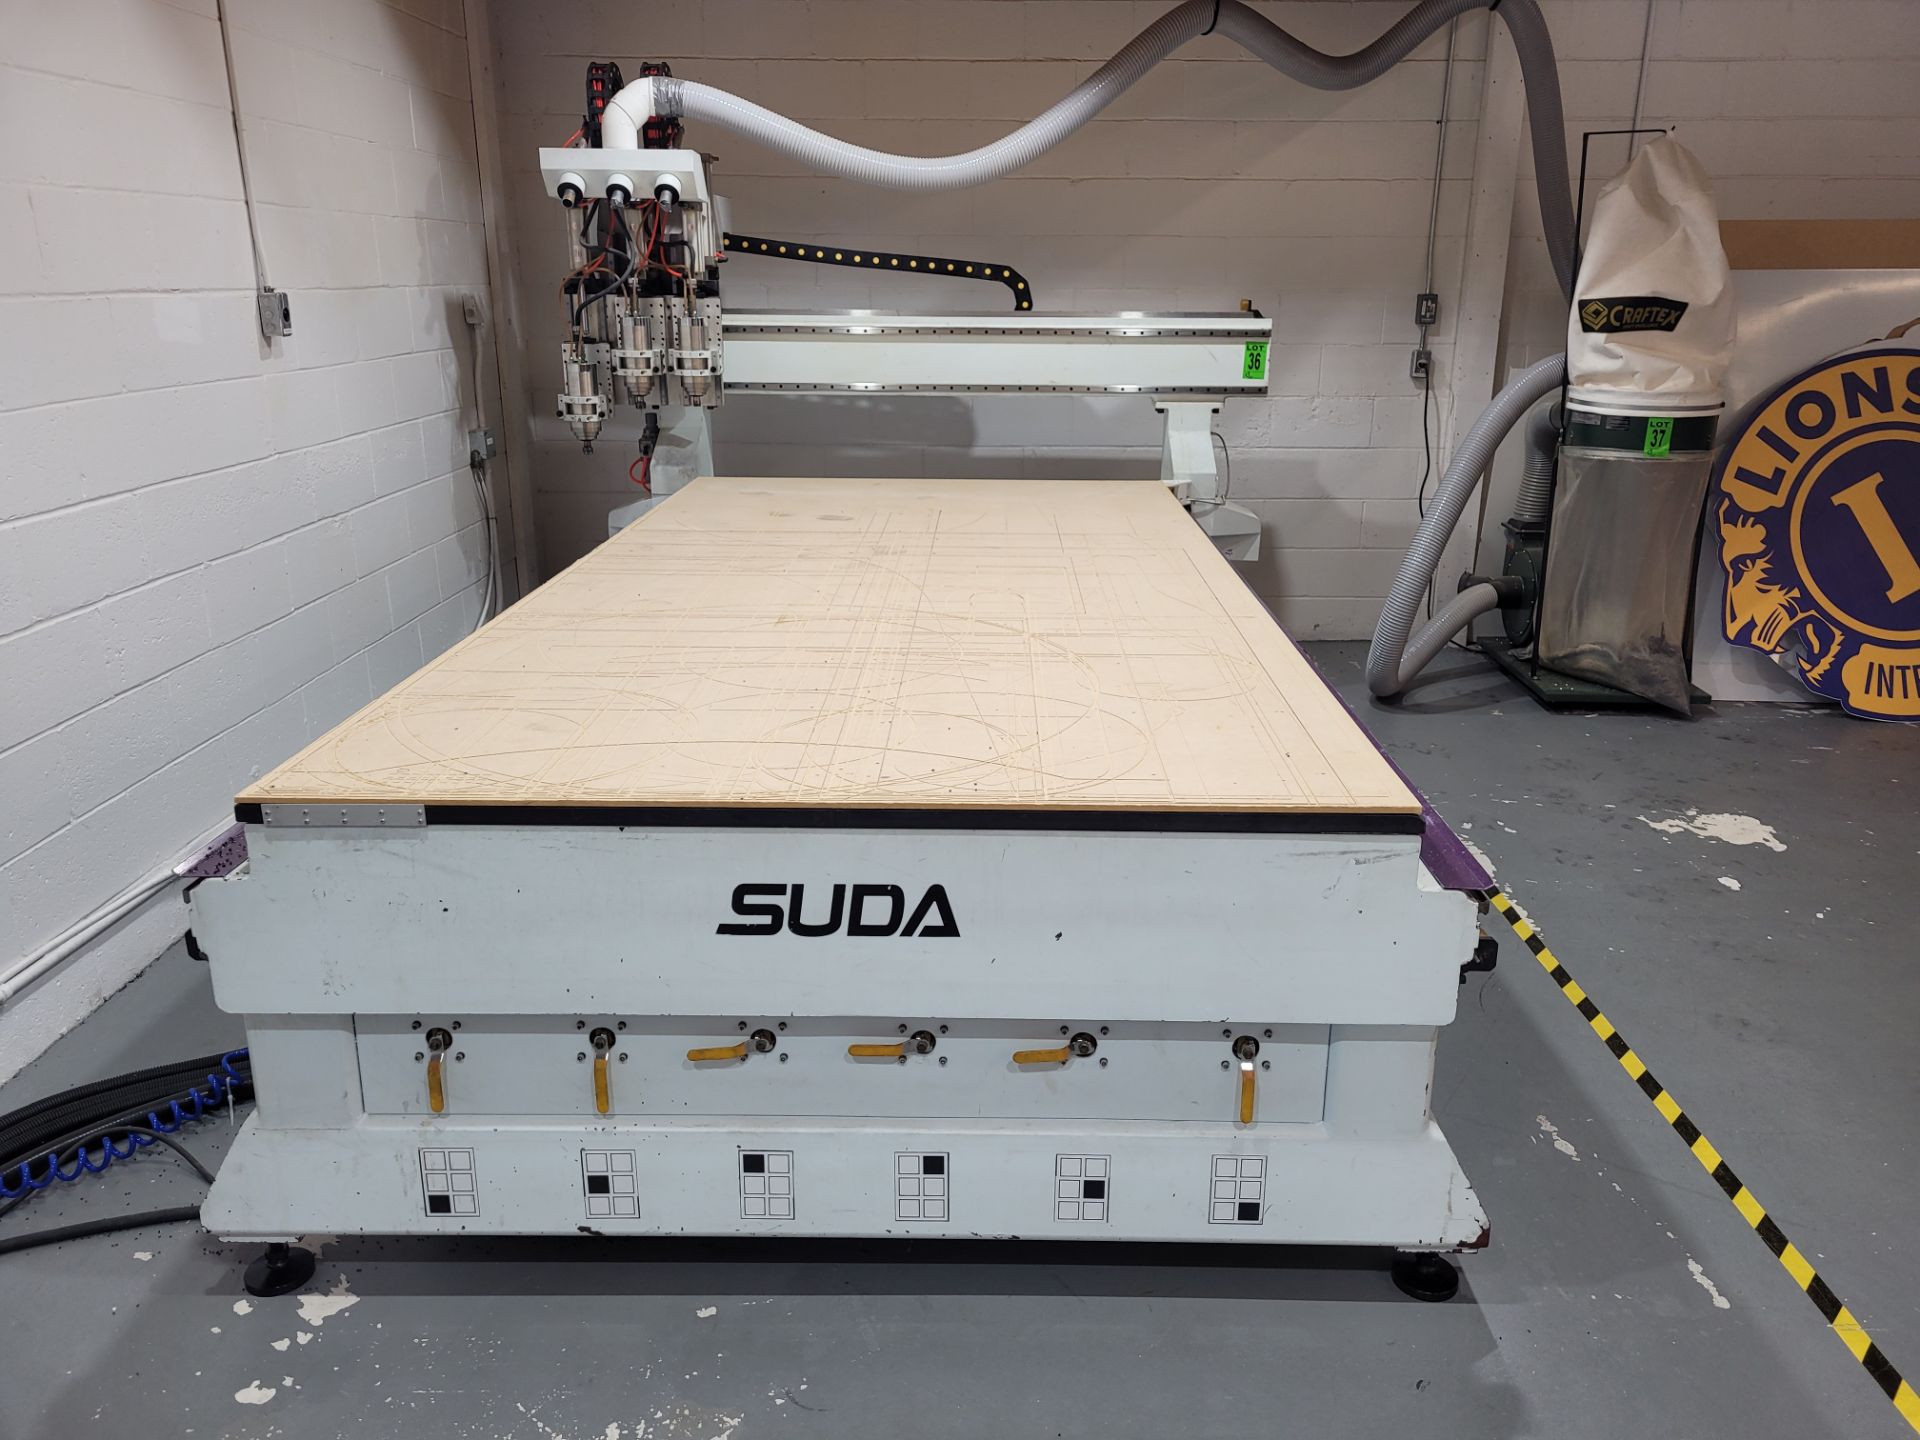 2015 SUDA ATC CNC Router mod. MG1630C, 3-Head System with Accessories and CRAFTEX mod. FM-300 Collec - Image 9 of 51